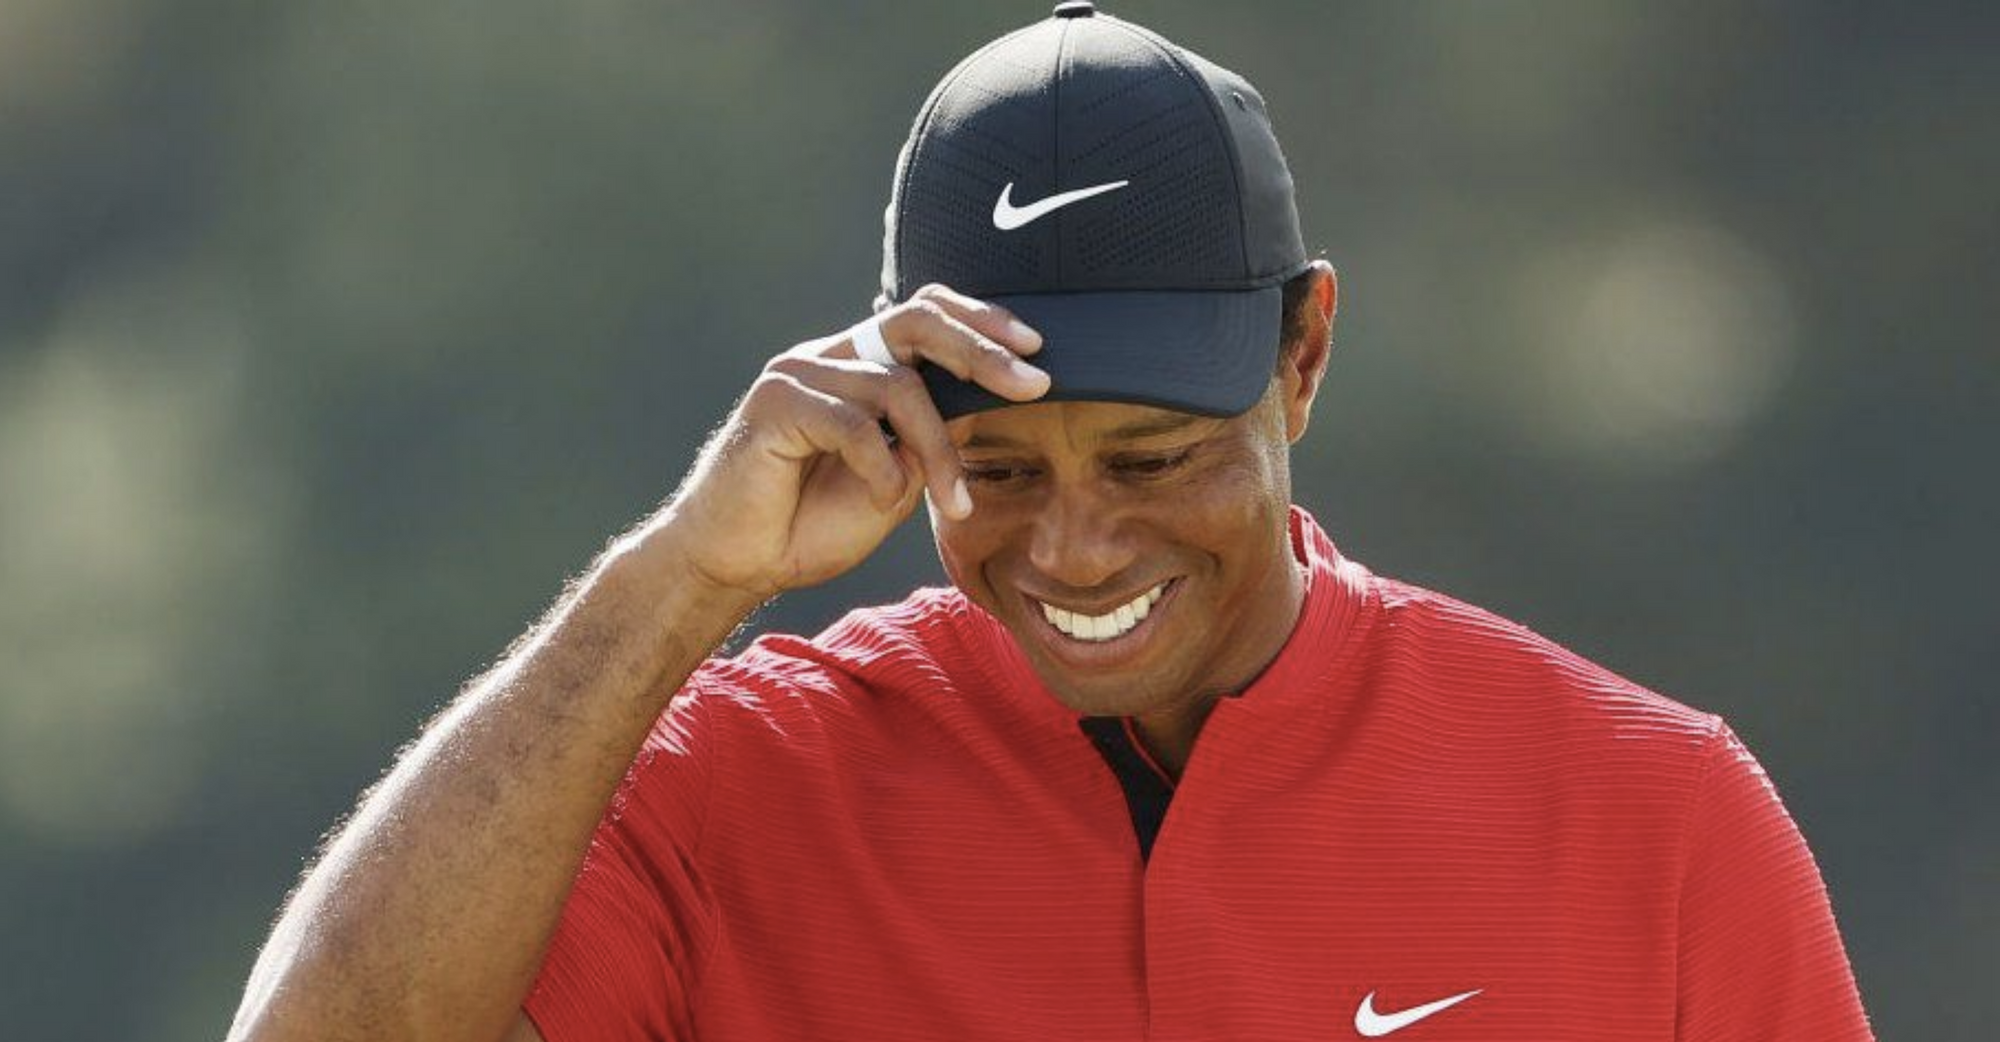 Sunday Paper Yippee!: Tiger Woods’ Expectation-Defying Return to Golf is Inspiring